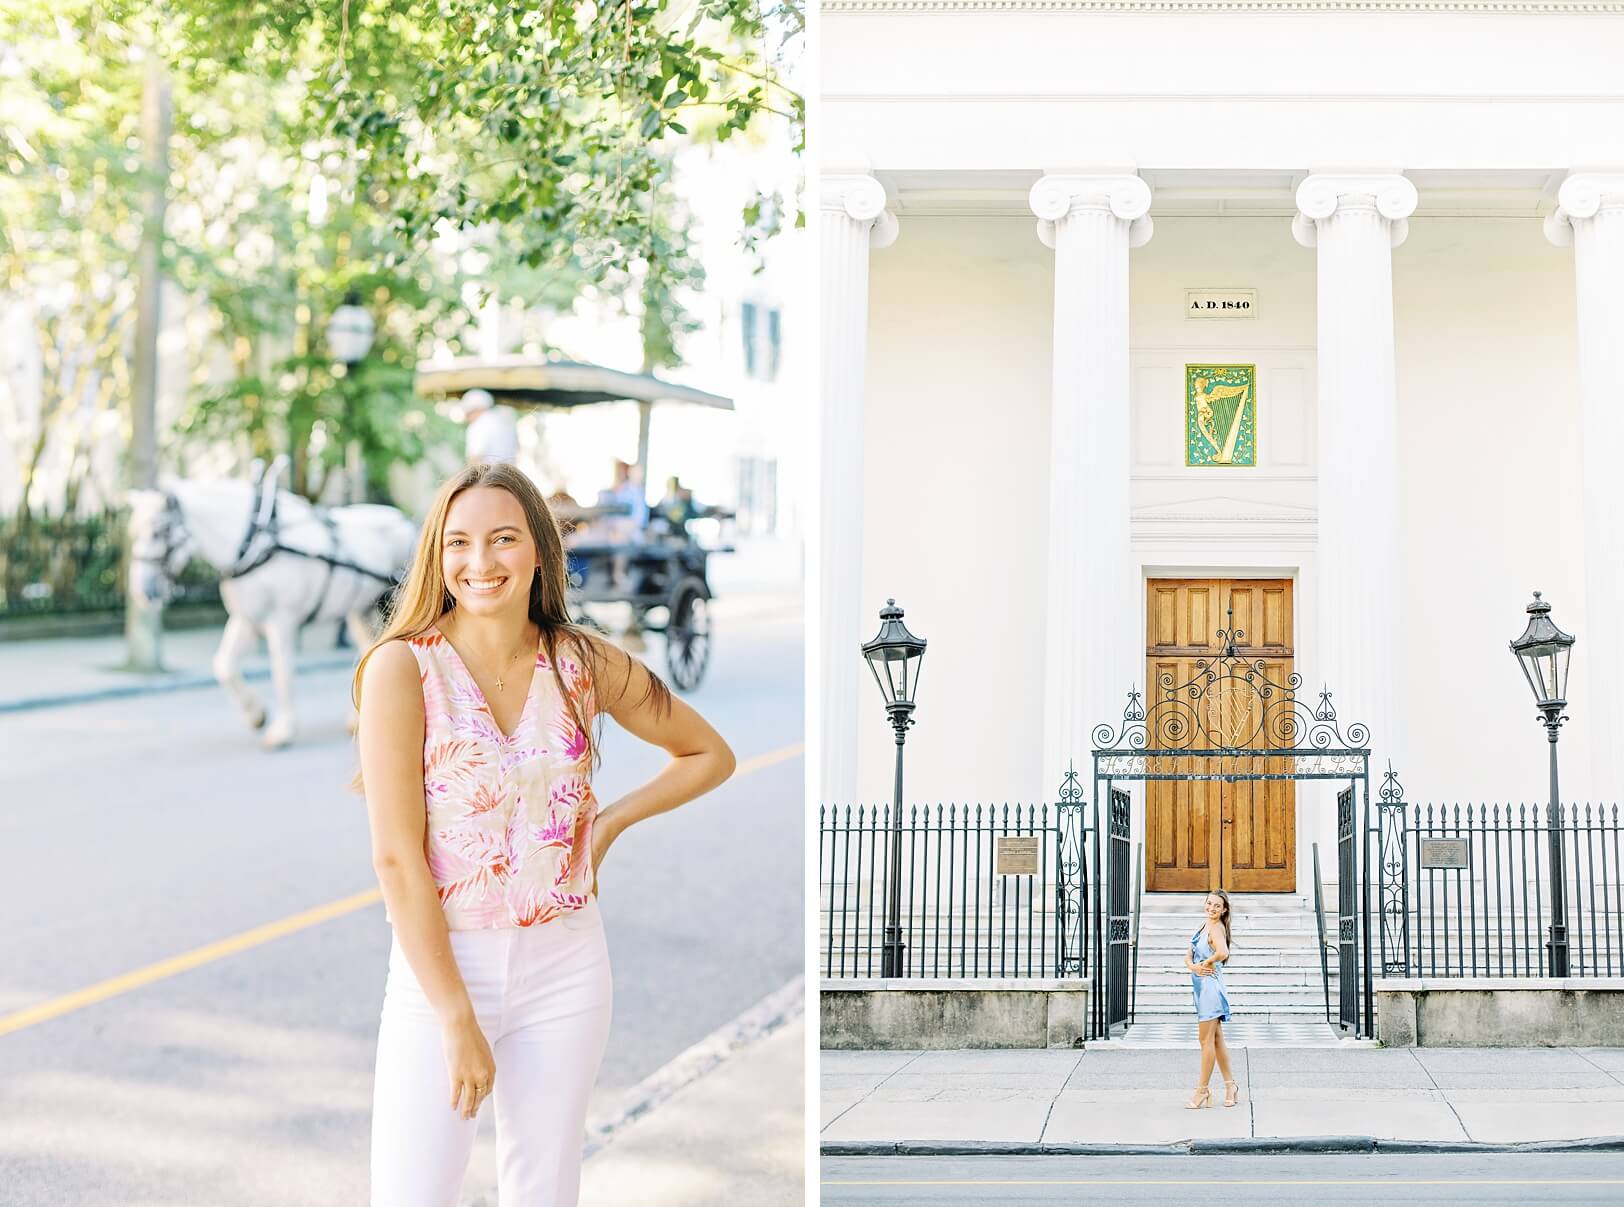 Classic Charleston photoshoot with horse carriage | Kaitlin Scott Photography 